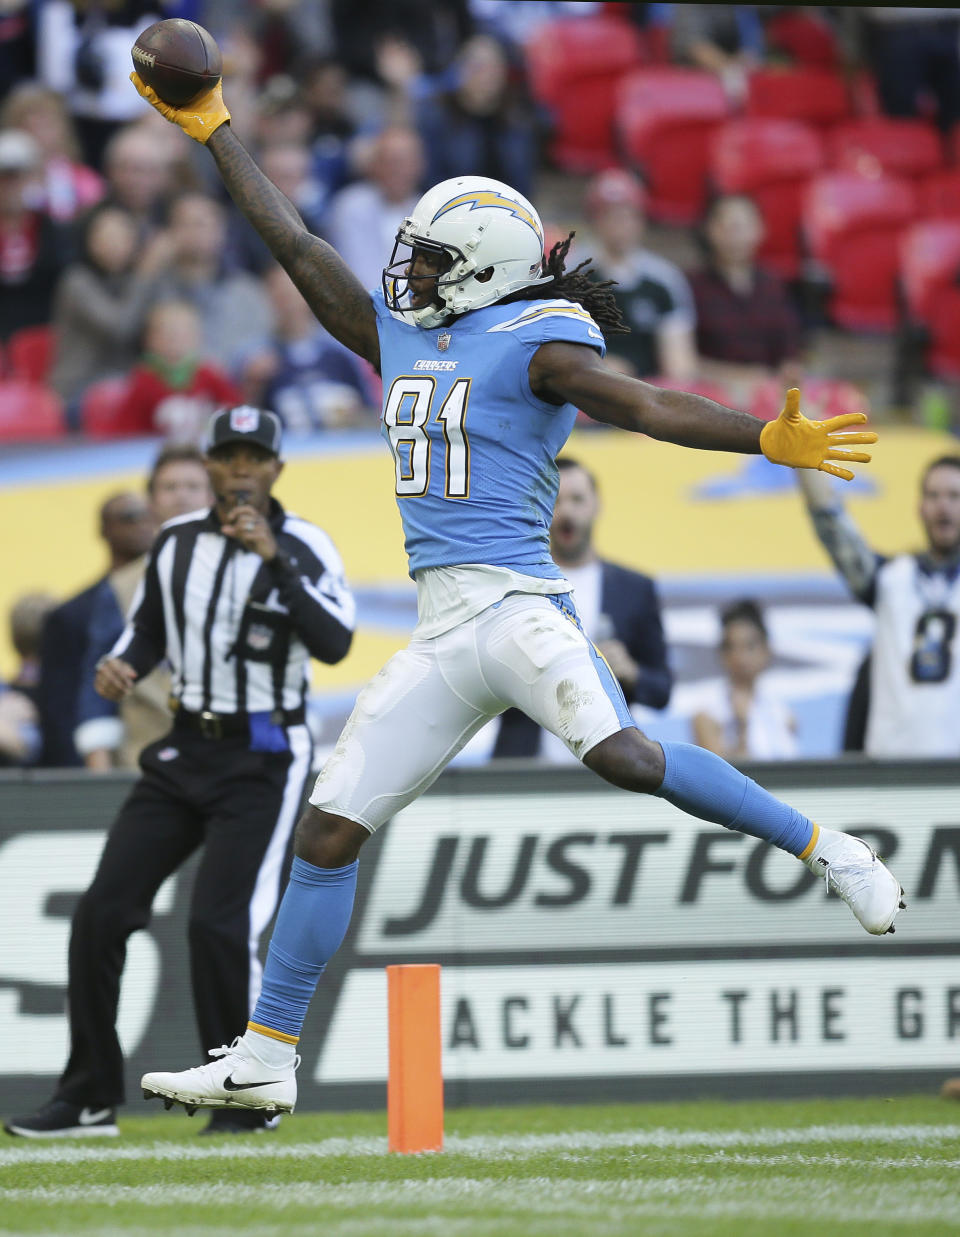 Los Angeles Chargers wide receiver Mike Williams (81) celebrates after scoring a touchdown during the second half of an NFL football game against Tennessee Titans at Wembley stadium in London, Sunday, Oct. 21, 2018. (AP Photo/Tim Ireland)